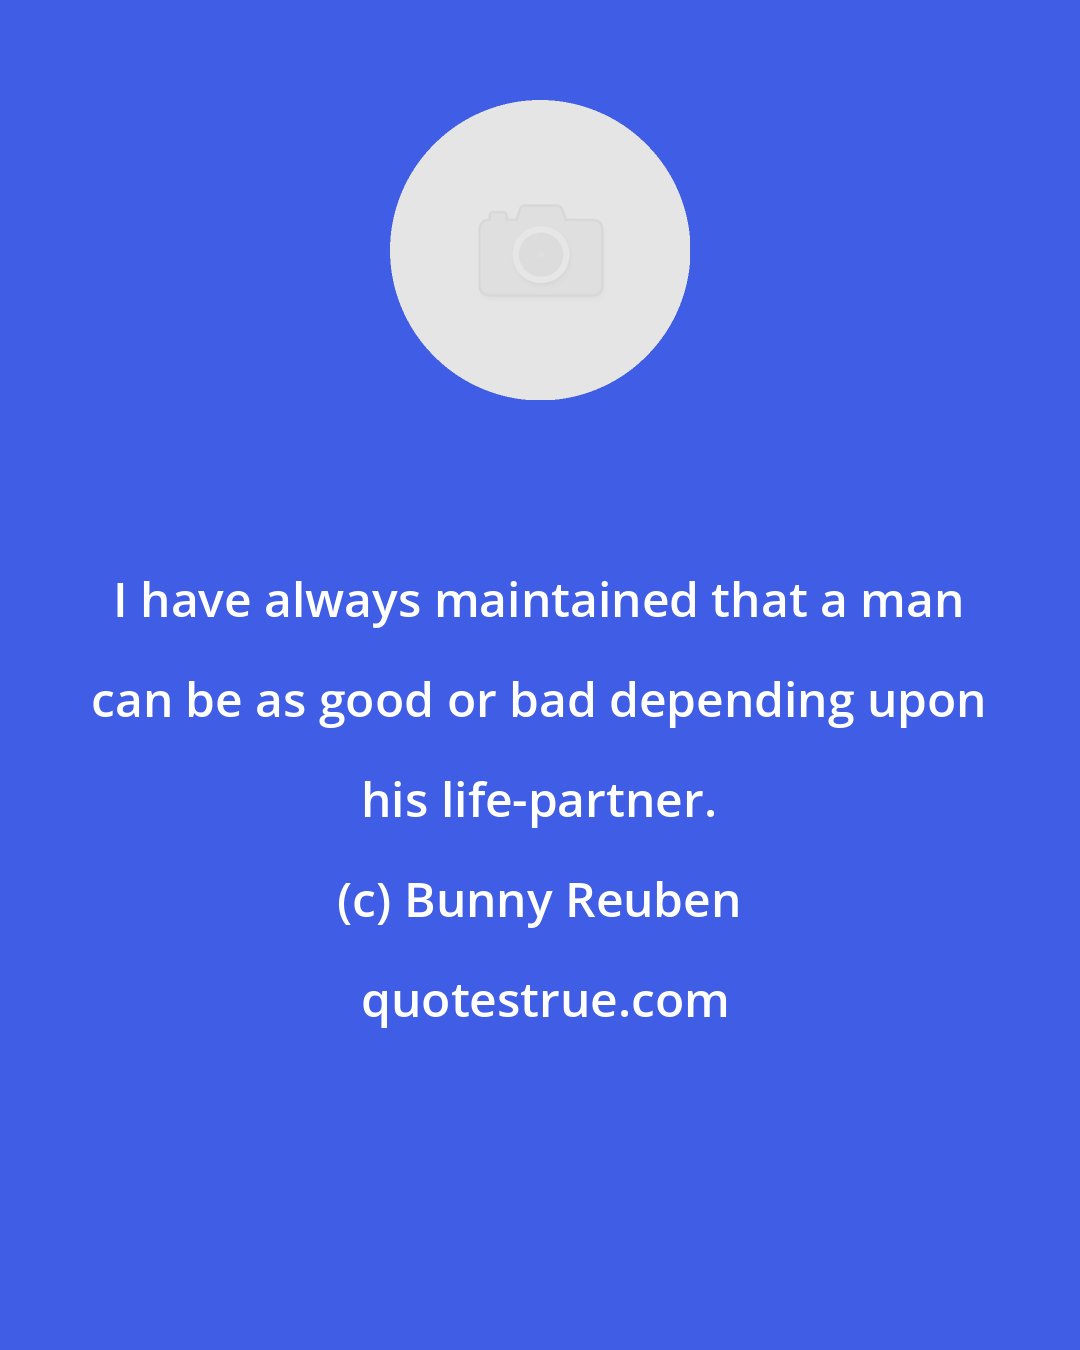 Bunny Reuben: I have always maintained that a man can be as good or bad depending upon his life-partner.